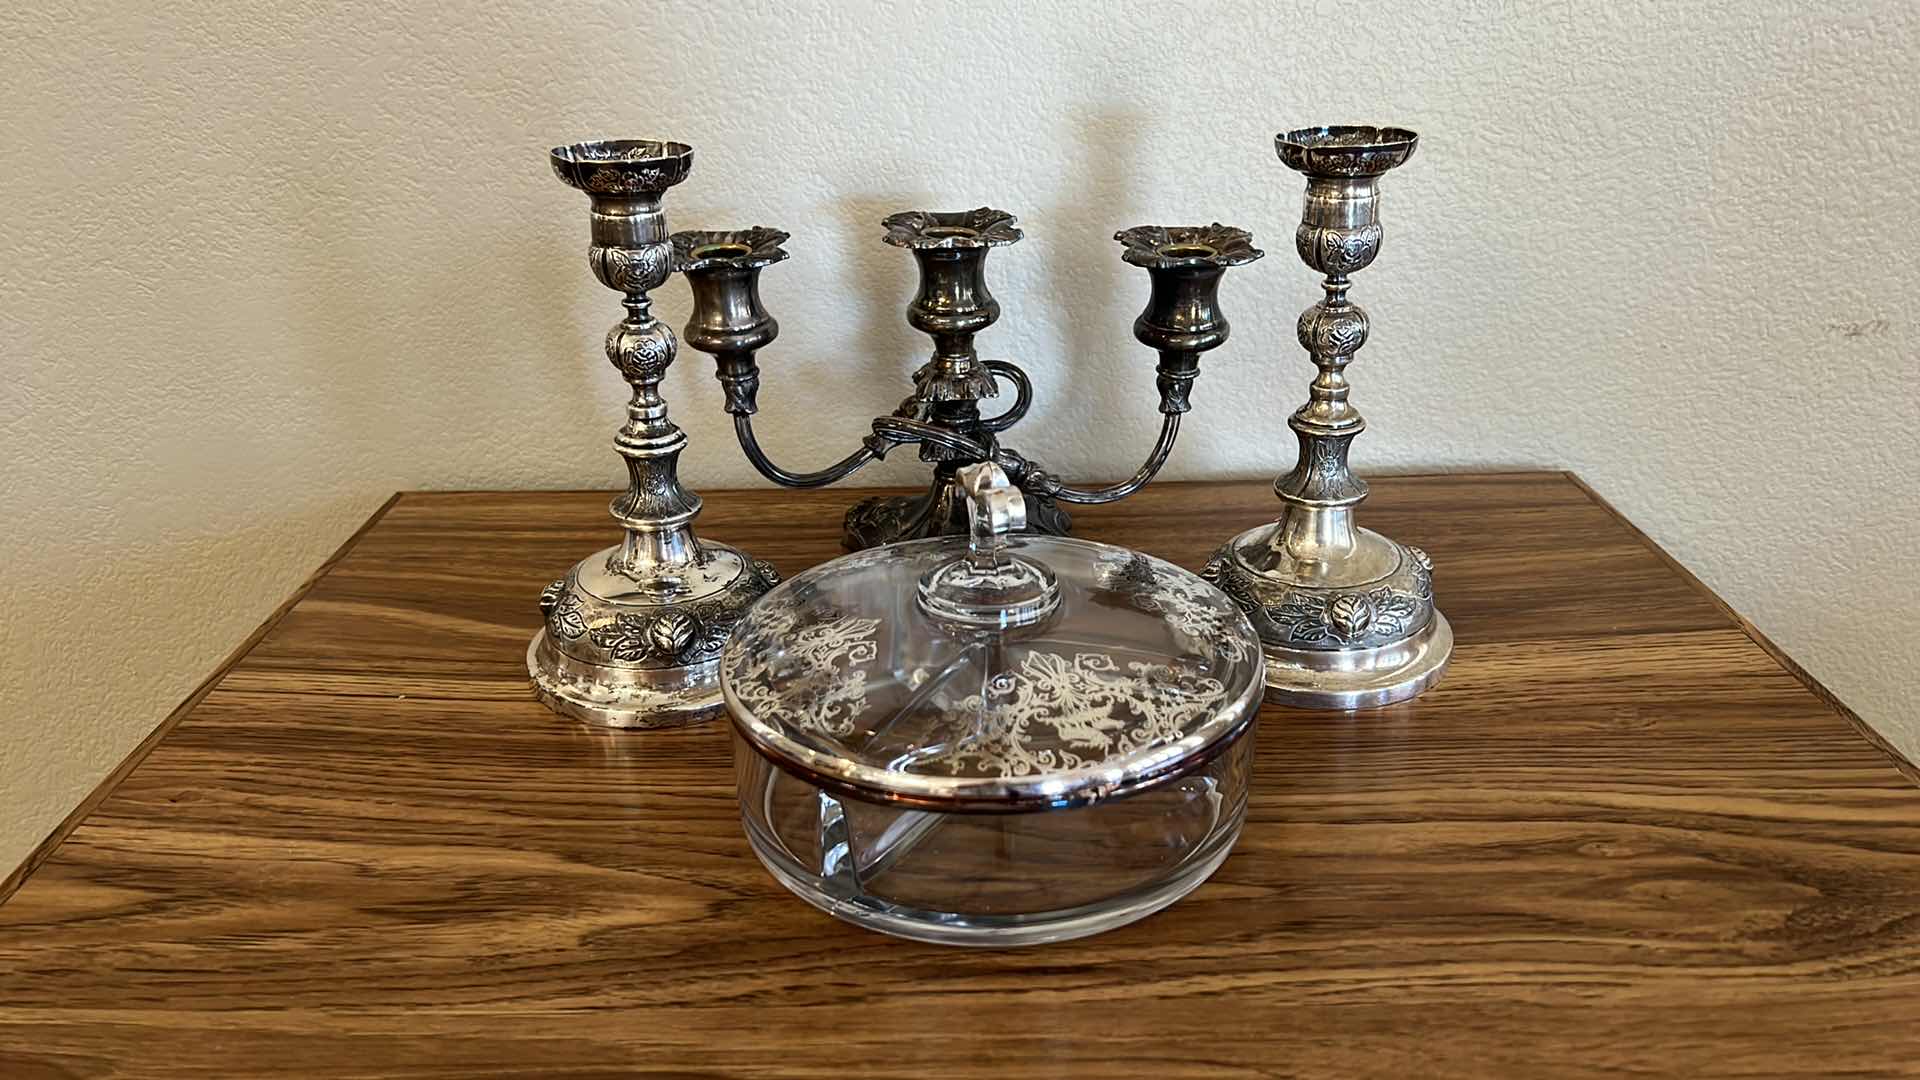 Photo 1 of SILVER-PLATED CANDLEHOLDERS, VINTAGE GLASS COVERED CANDY DISH